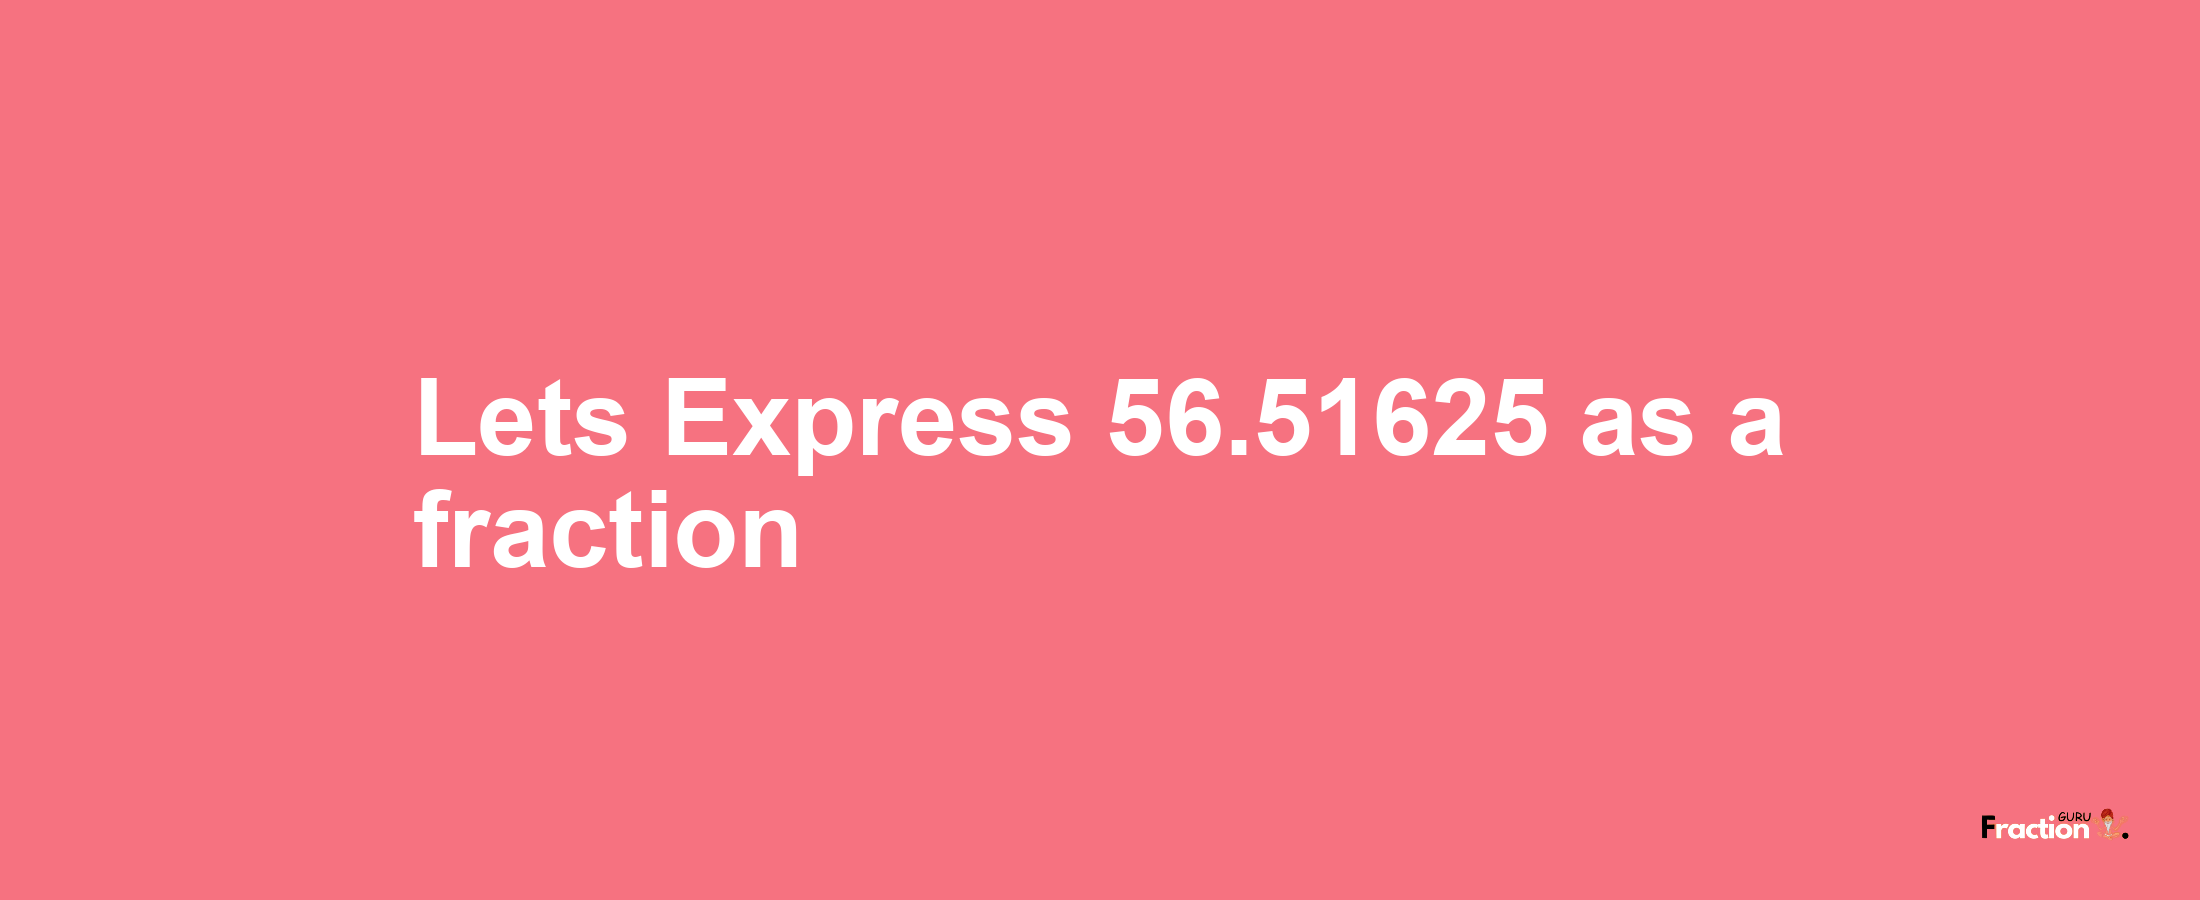 Lets Express 56.51625 as afraction